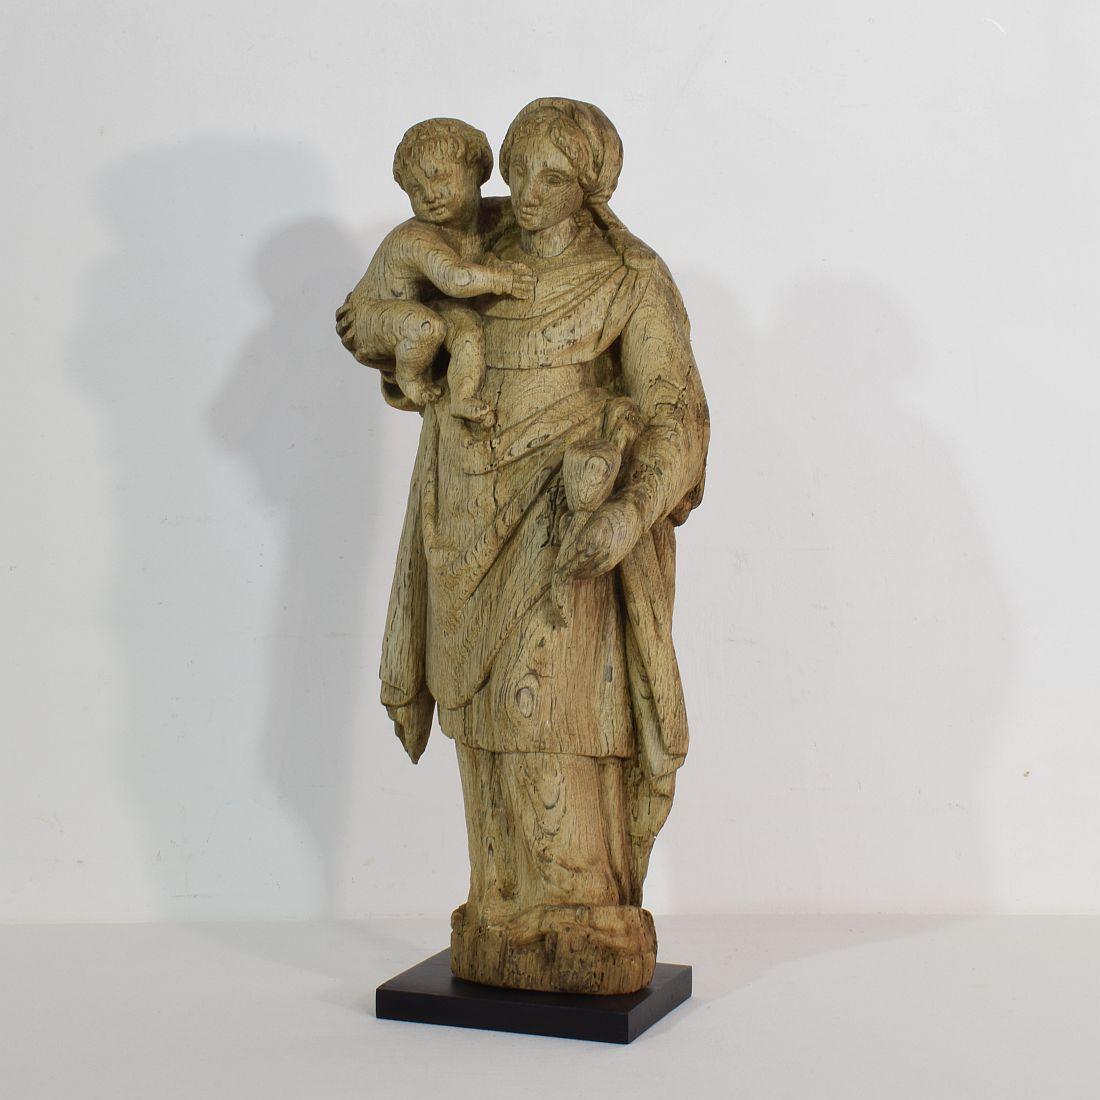 Beautiful weathered oak Madonna with child, France, circa 1650-1750. Weathered, losses.
Measurement includes the wooden base.